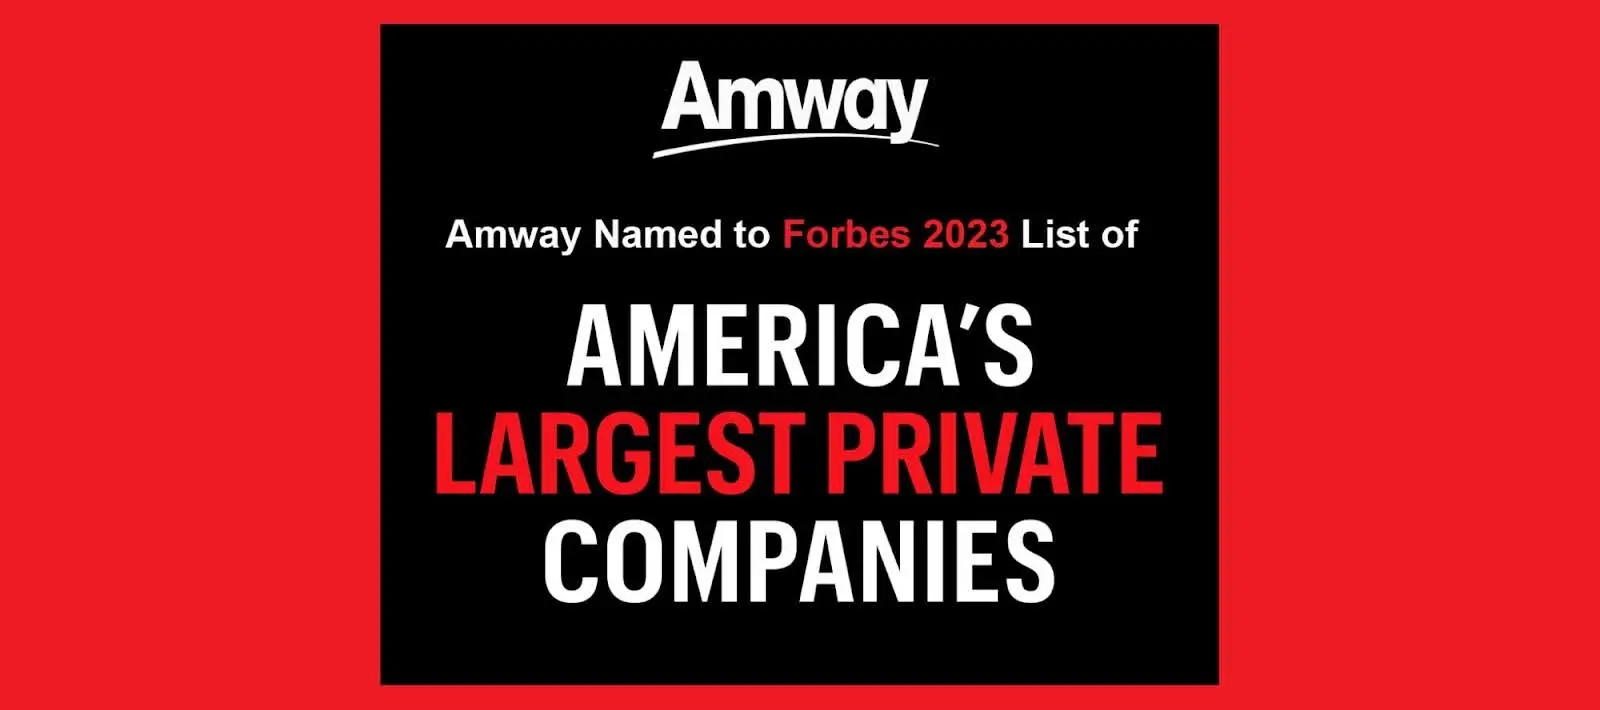 Amway was named to Forbes 2023 list of America’s Largest Private Companies.